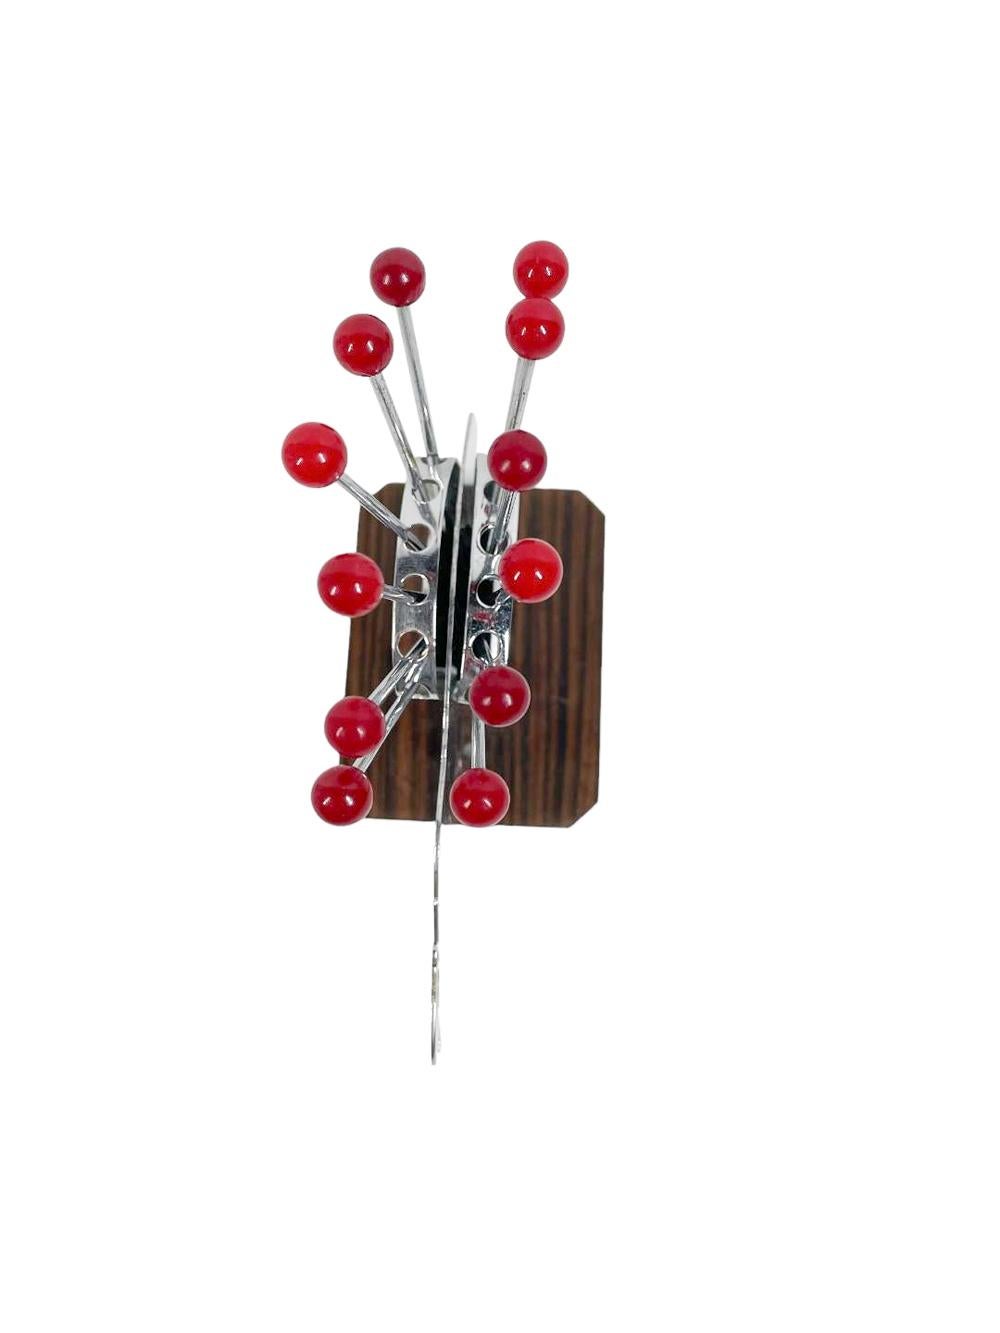 Art Deco Elephant Cocktail Pick Set in Chrome and Wood w/12 Red Ball Top Picks 1